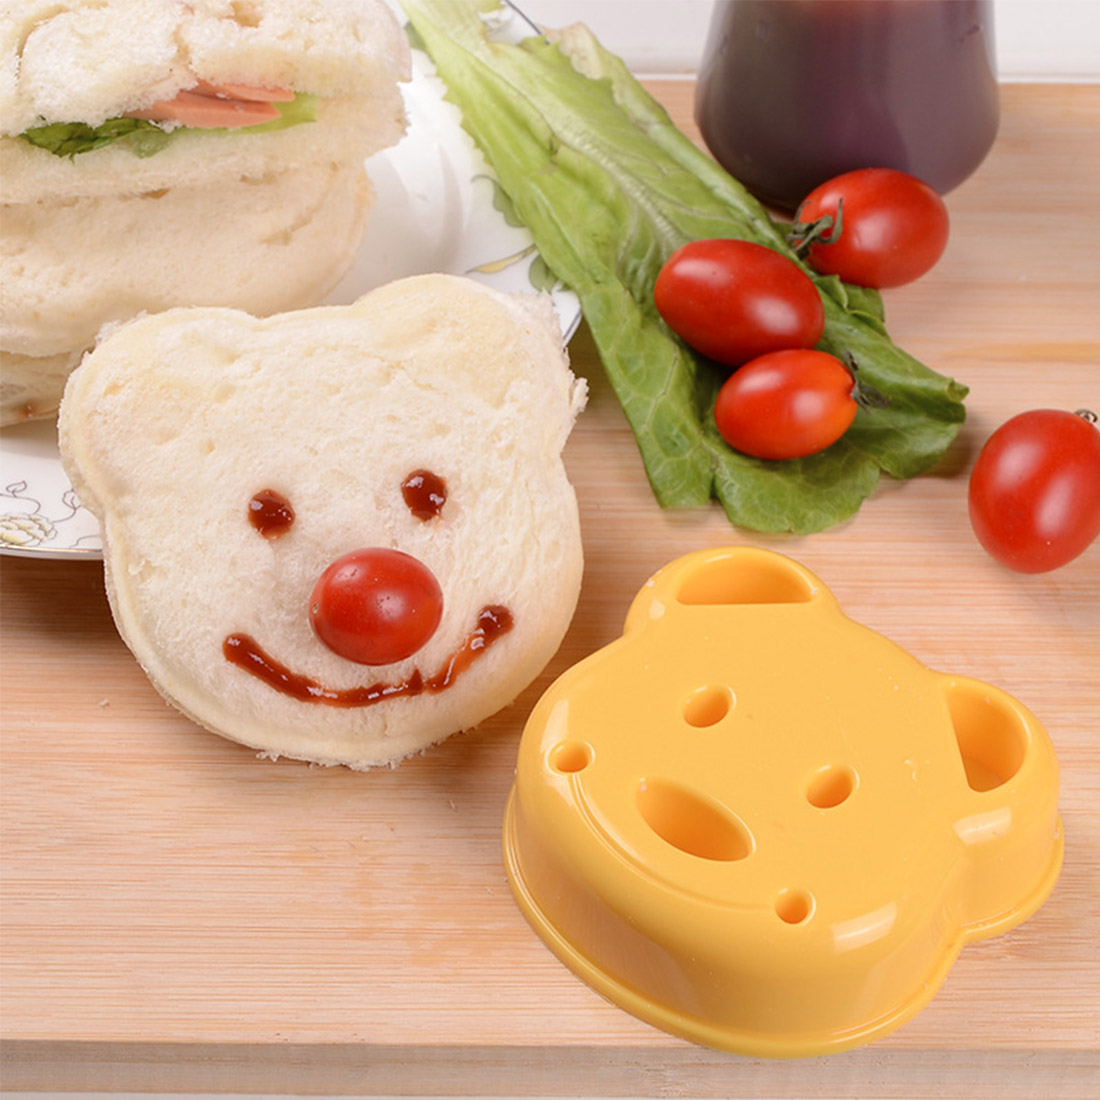 1PCS Little Bear Shape Sandwich Mold Bread Biscuits Embossed Device Cake Mold Maker DIY Mold Cutter High Quality Random Color